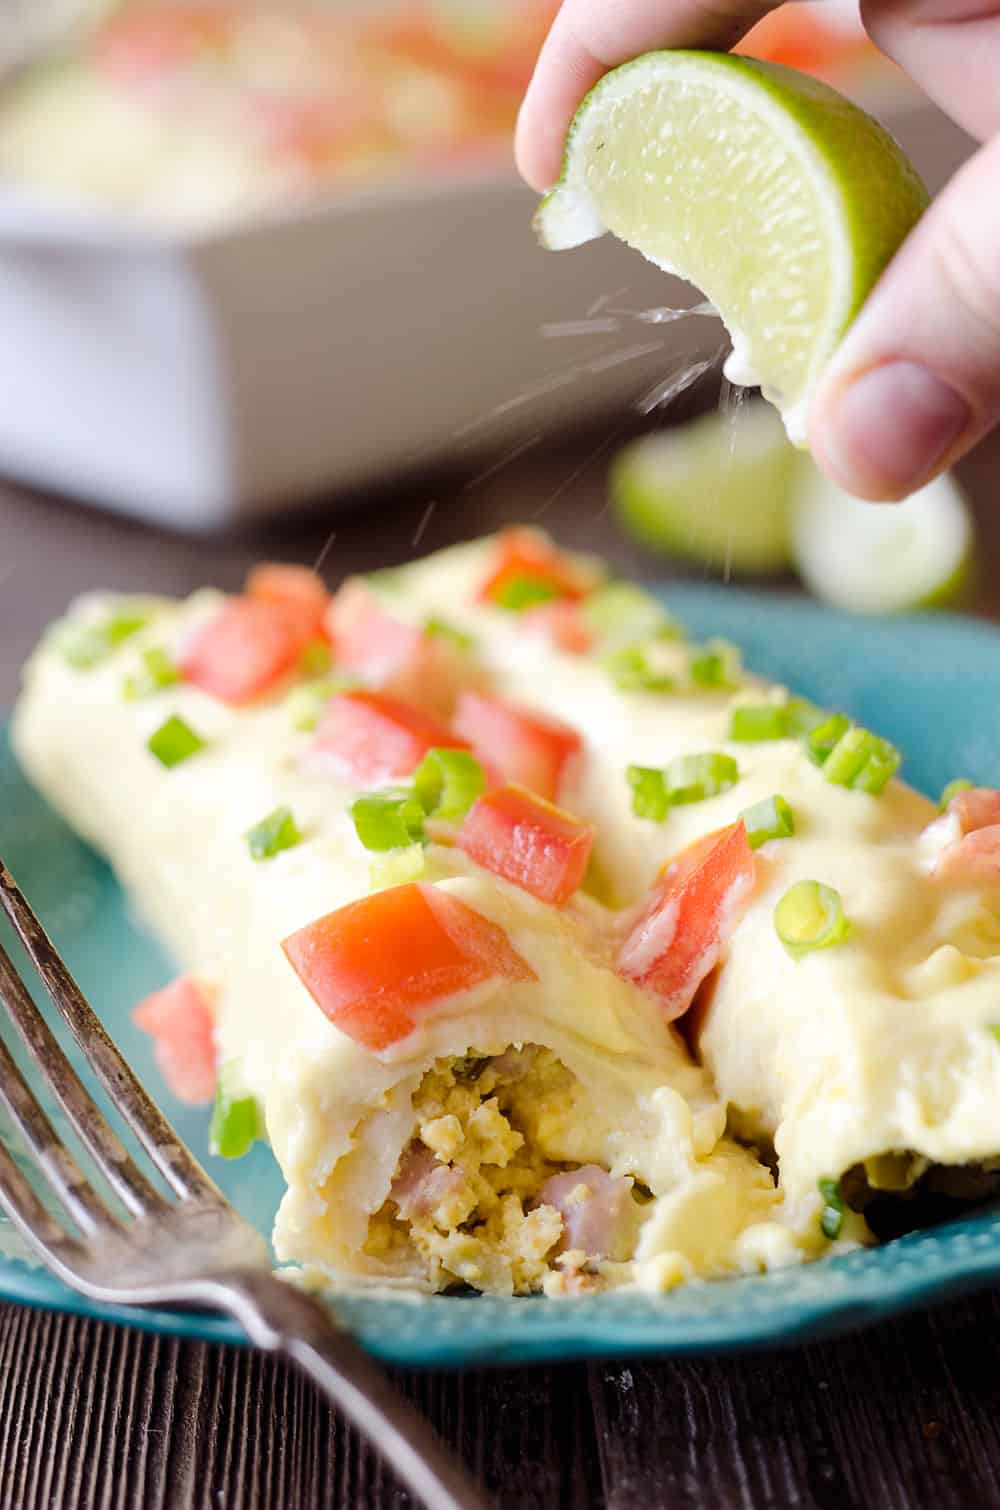 Cheesy Eggs Benedict Breakfast Enchiladas are a fun twist on brunch that will satisfy a crowd! Fluffy scrambled eggs, green chilis and leftover ham are rolled up in flour tortillas and covered with a cheesy hollandaise sauce, then topped with fresh tomatoes and green onions, for a zesty and decadent breakfast you will love!